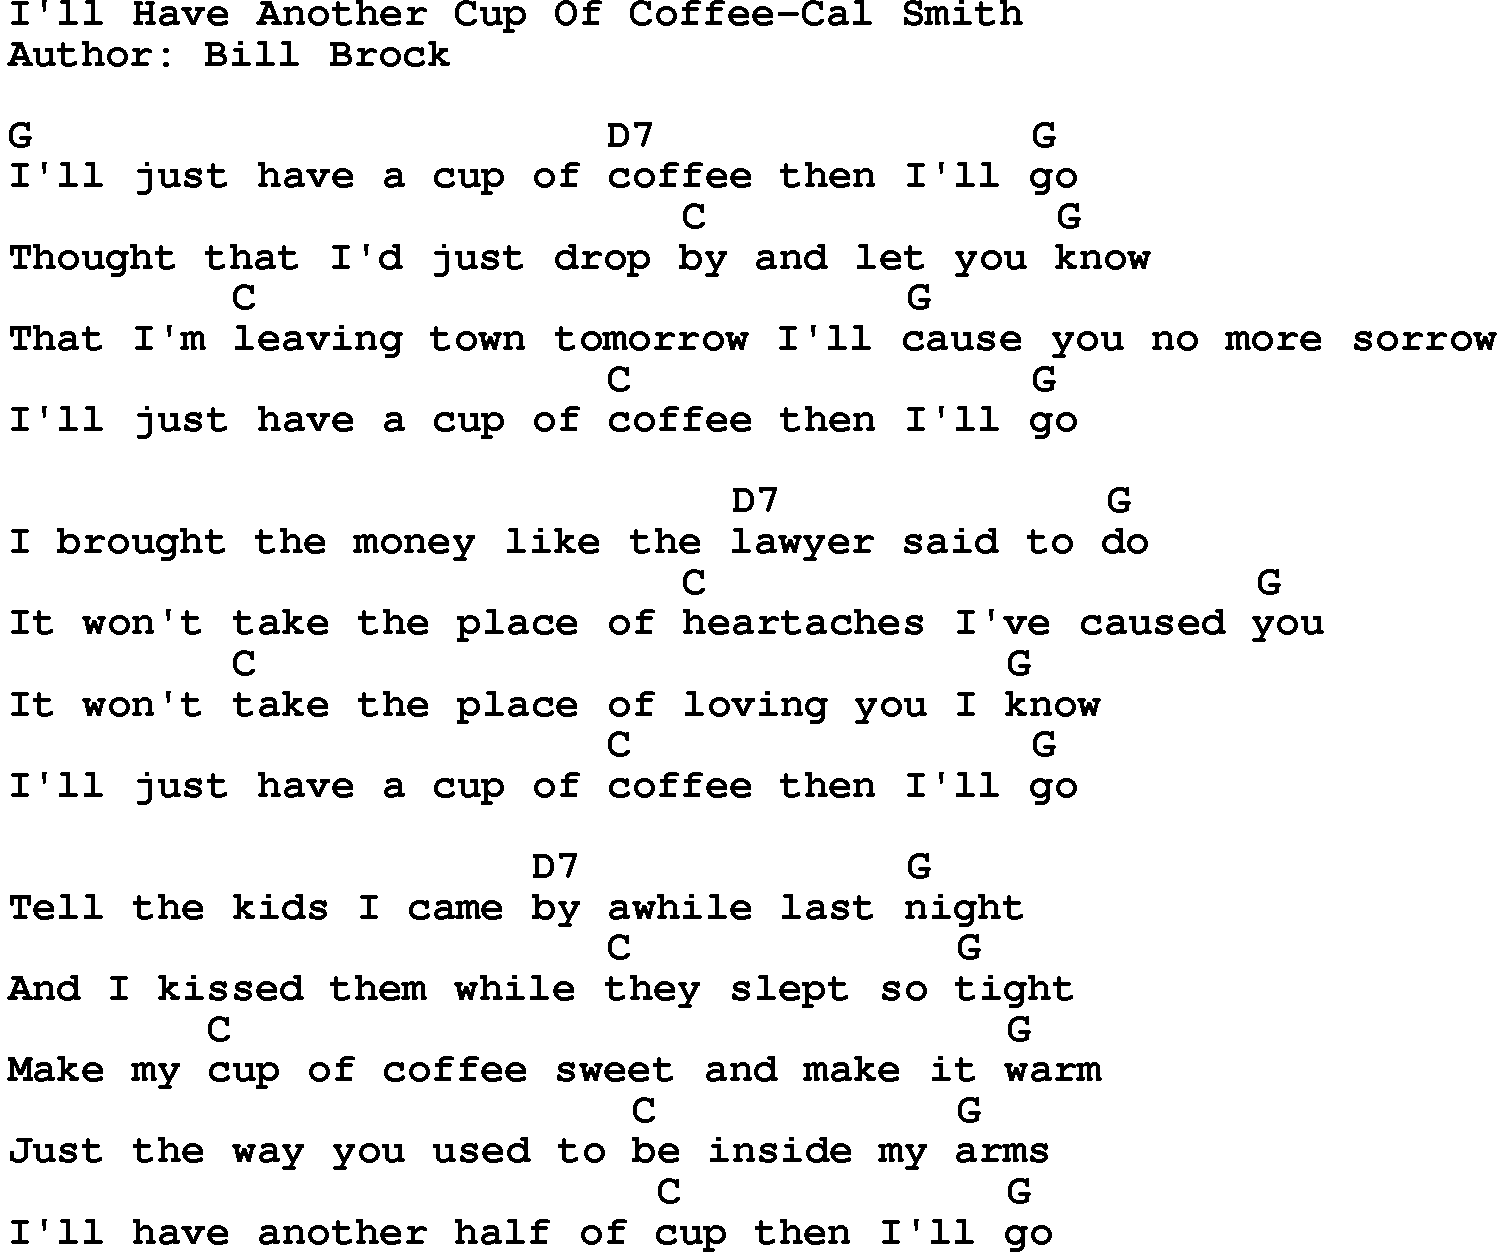 Country music song: I'll Have Another Cup Of Coffee-Cal Smith lyrics and chords